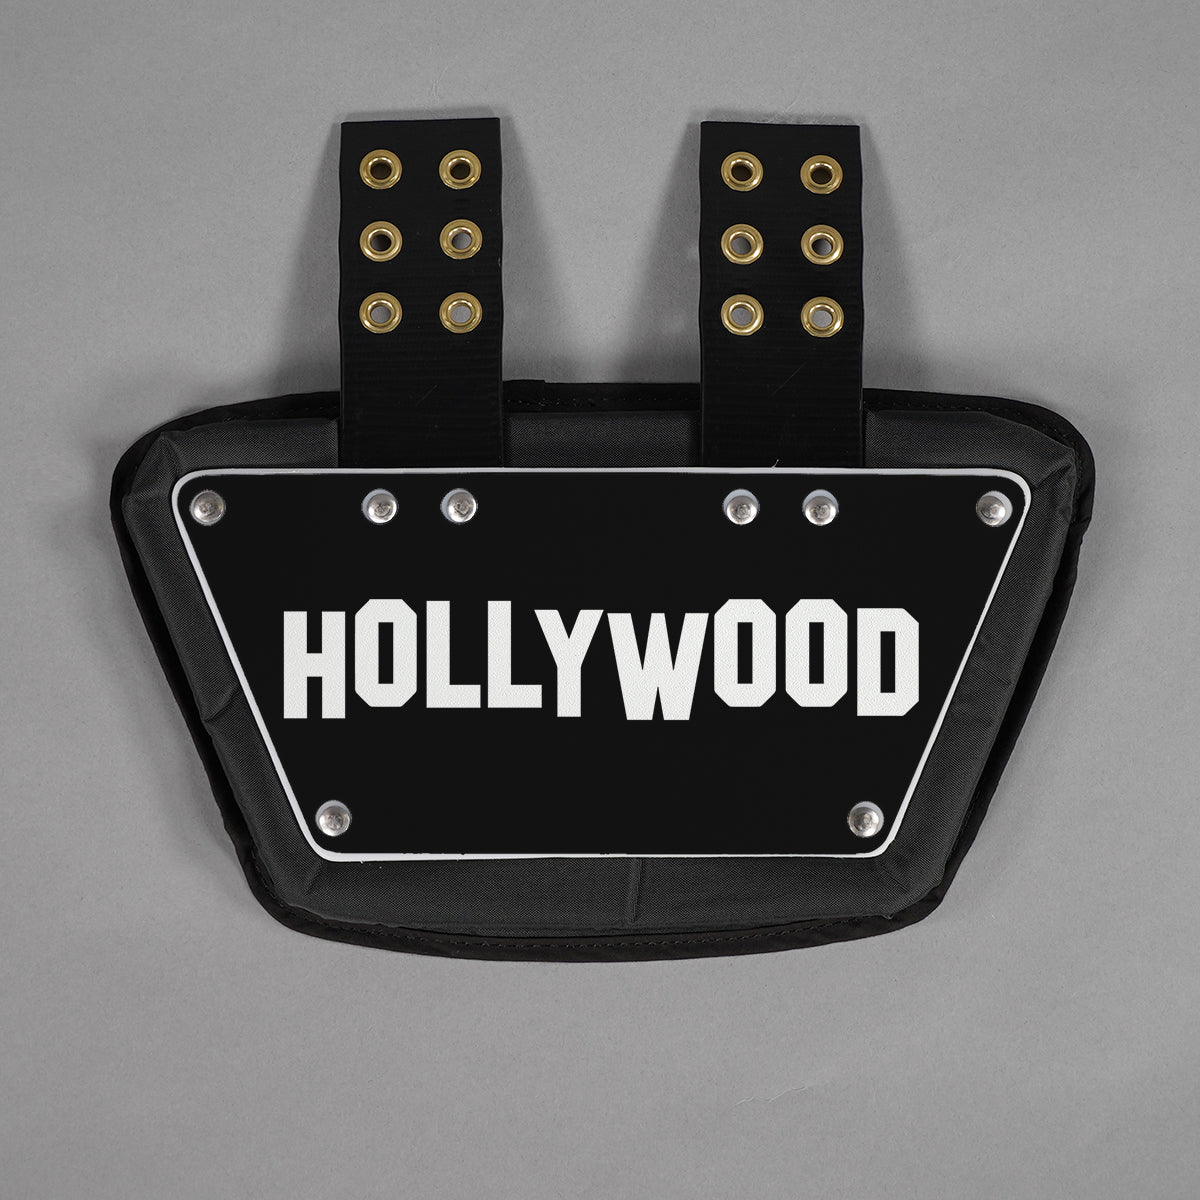 Hollywood Sticker for Back Plate